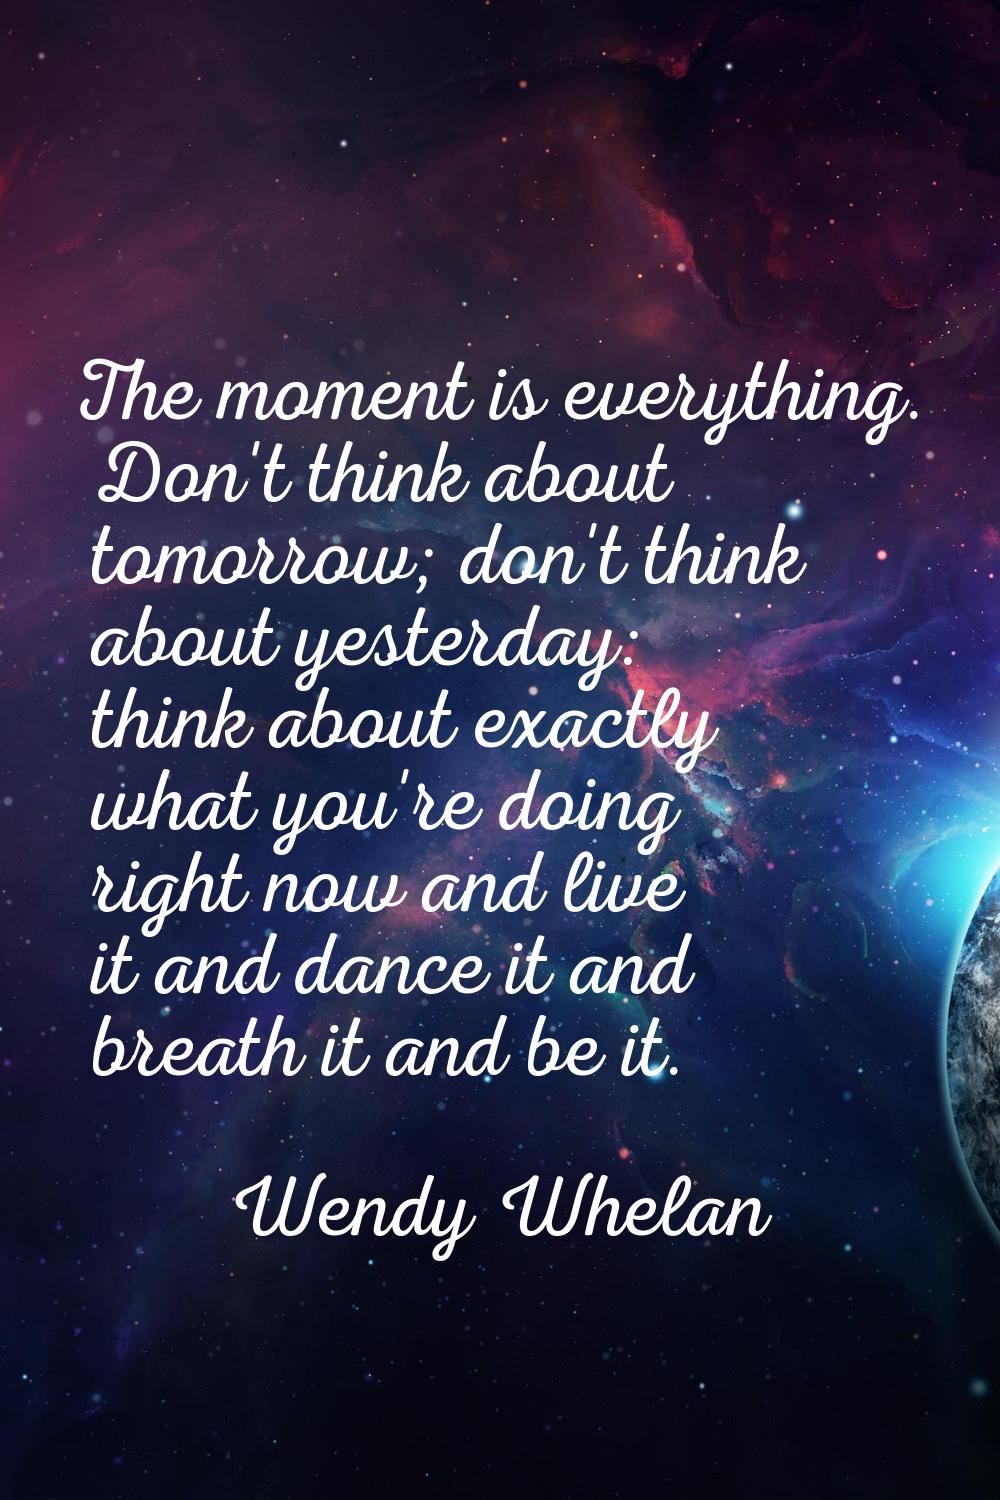 The moment is everything. Don't think about tomorrow; don't think about yesterday: think about exac